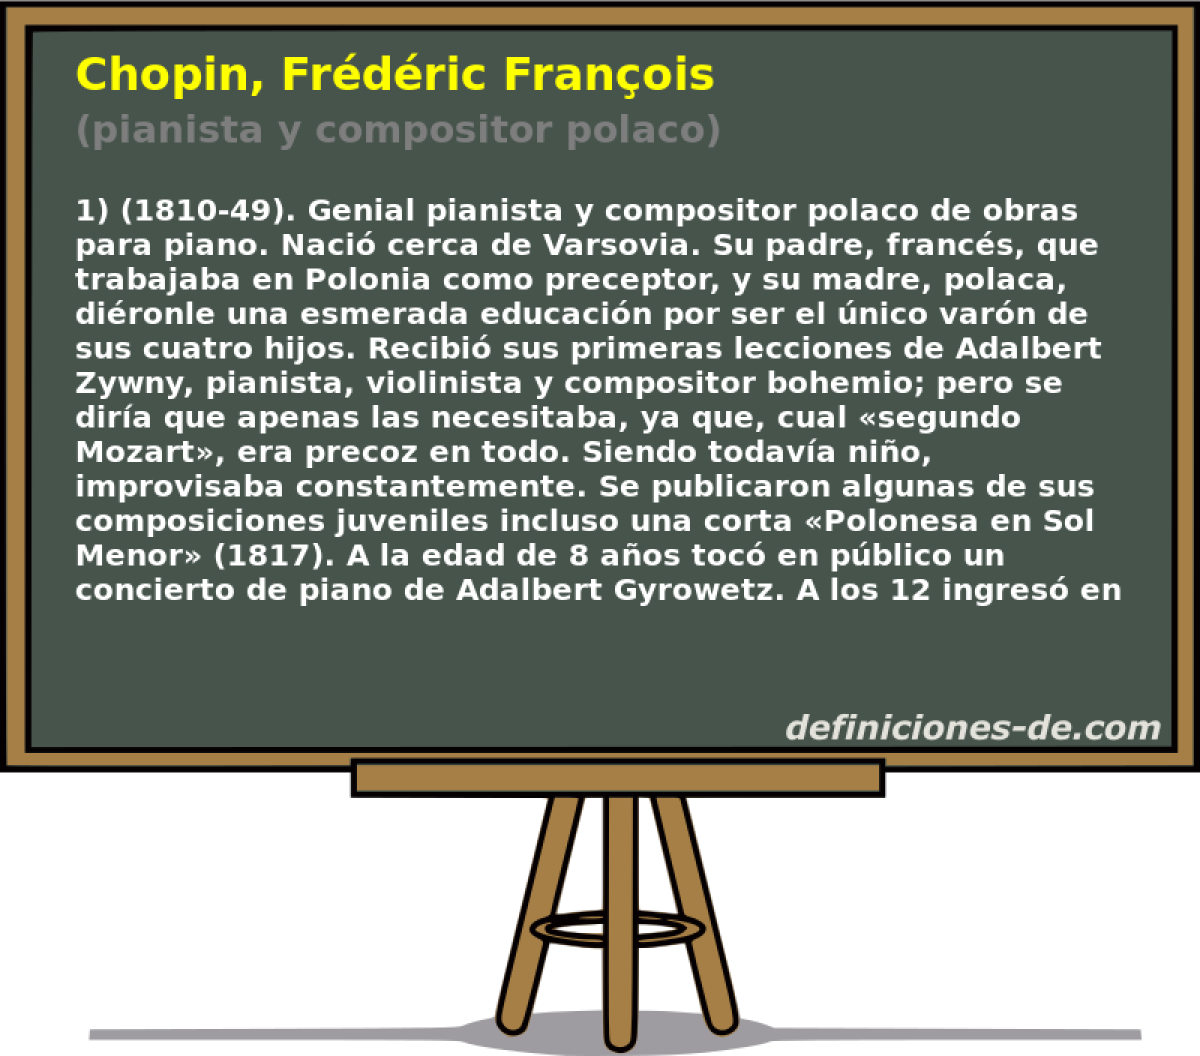 Chopin, Frdric Franois (pianista y compositor polaco)